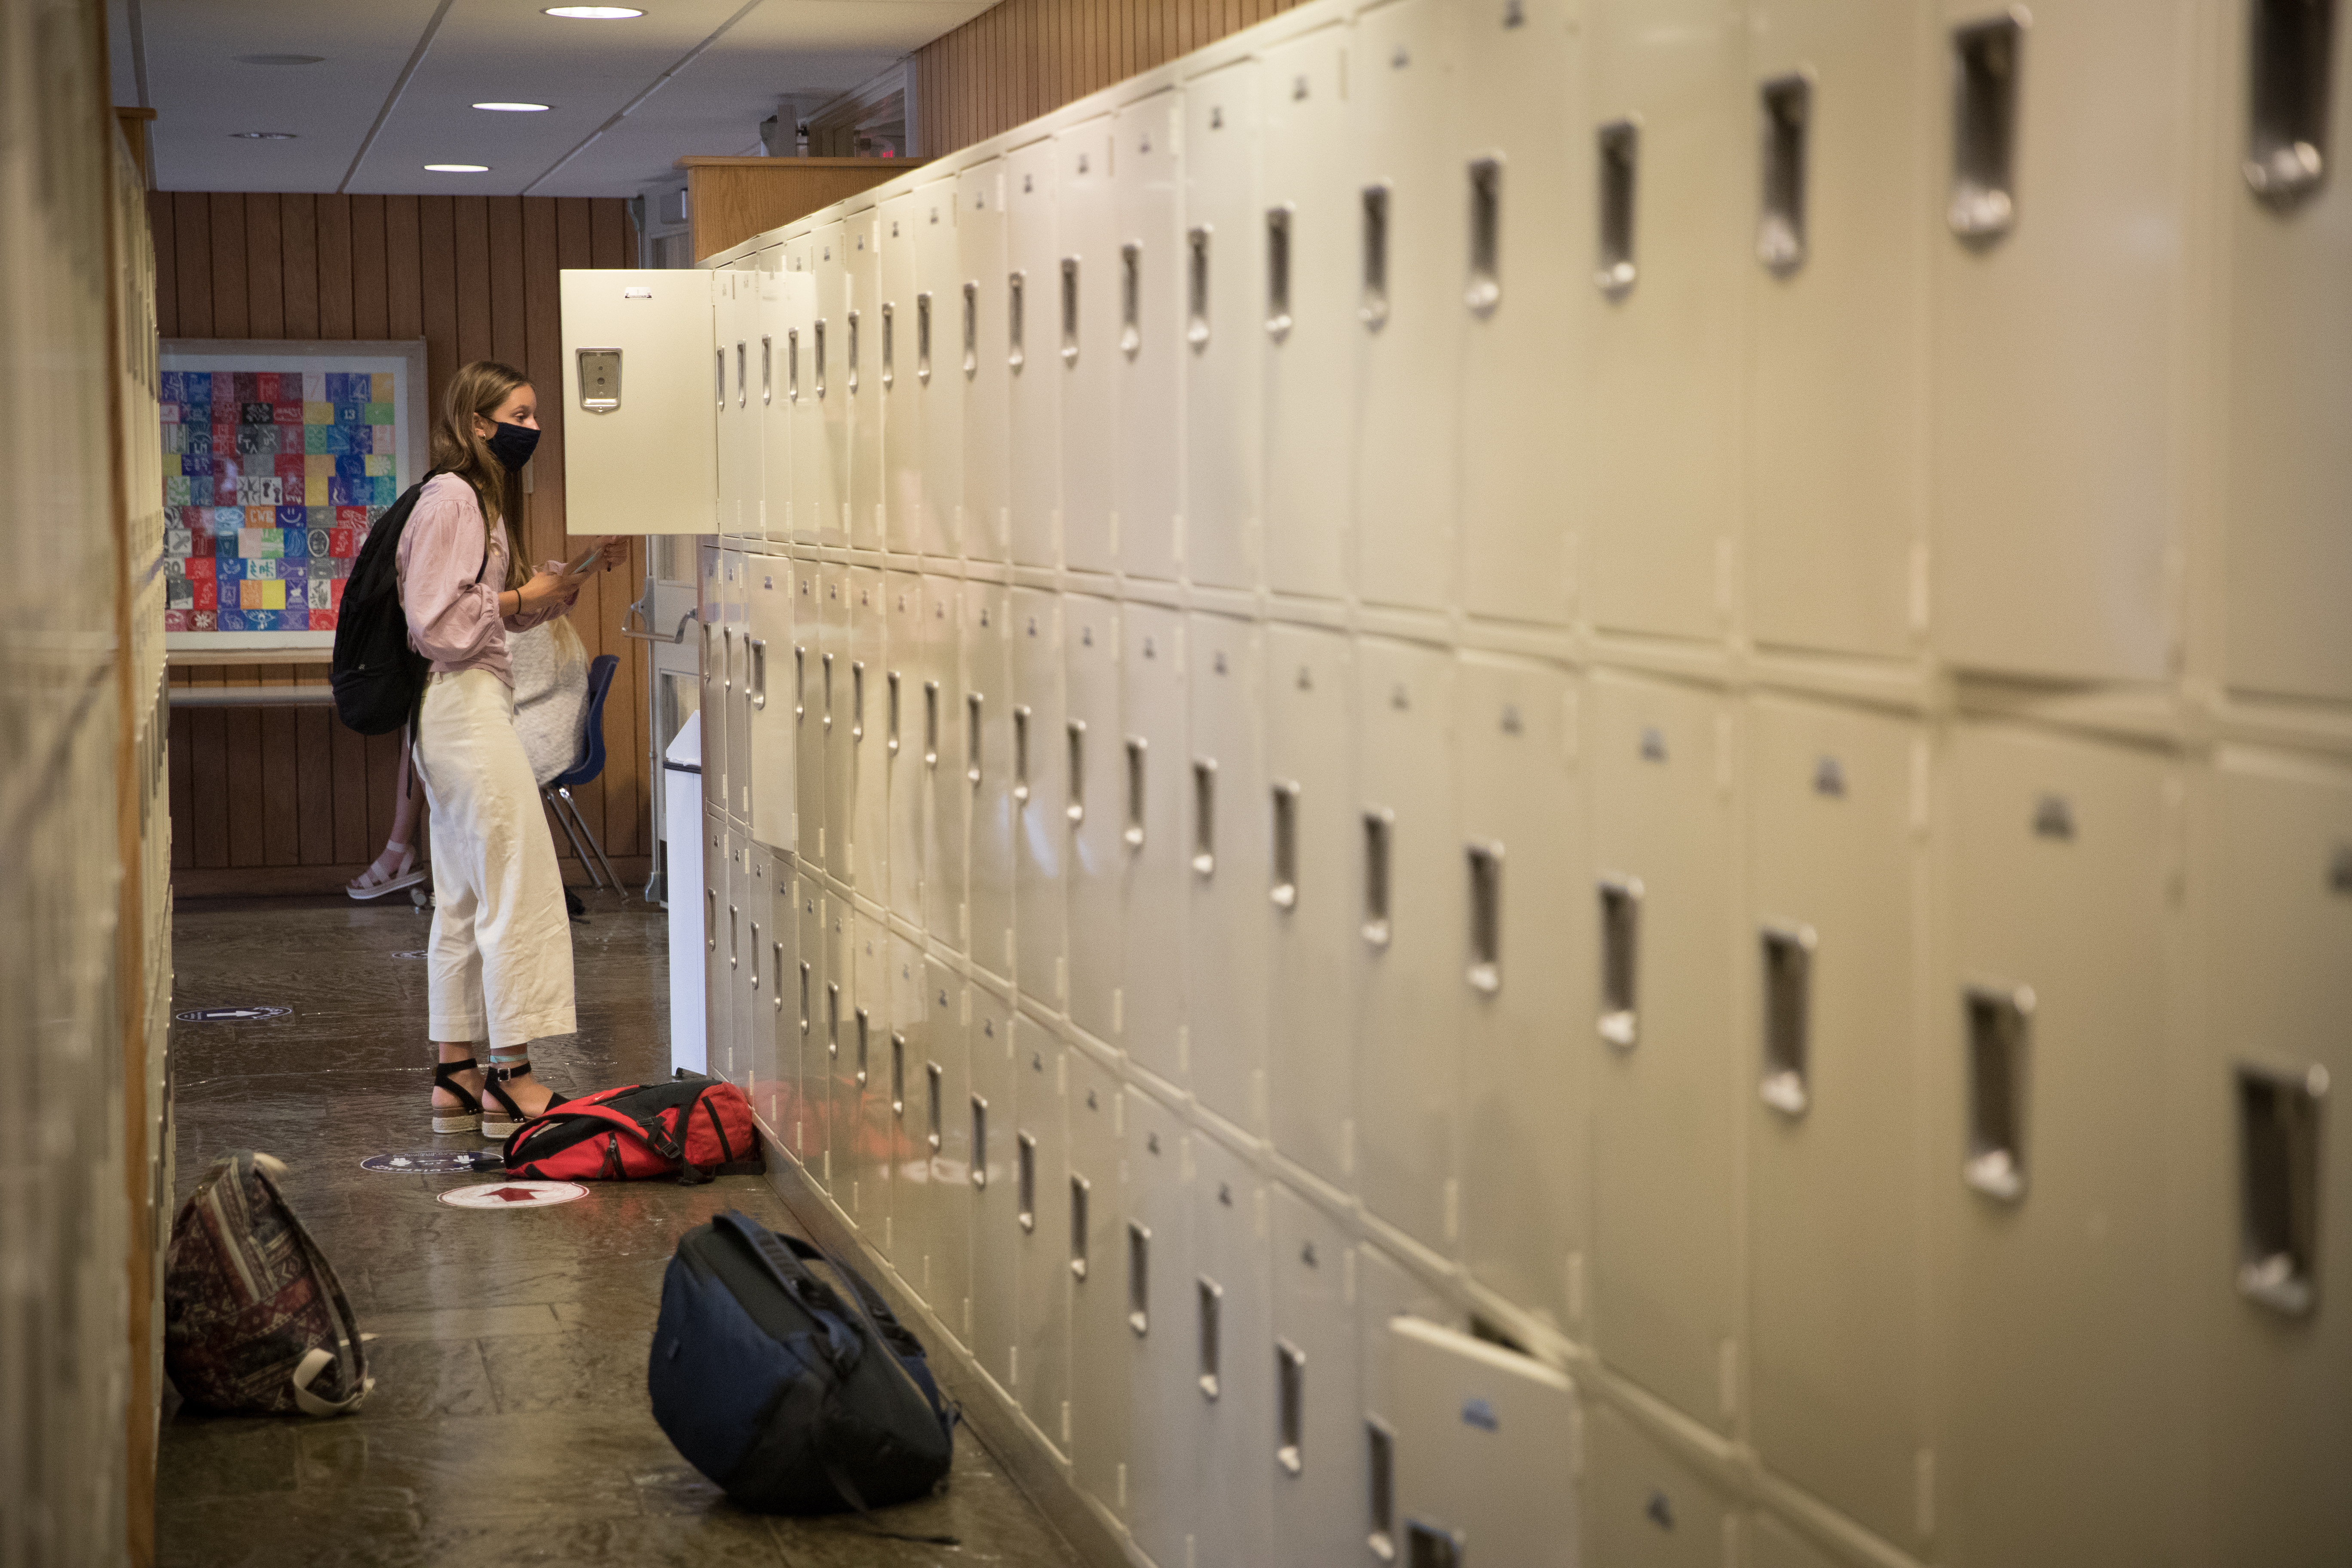 Boarding school student in front of lockers at Tabor Academy